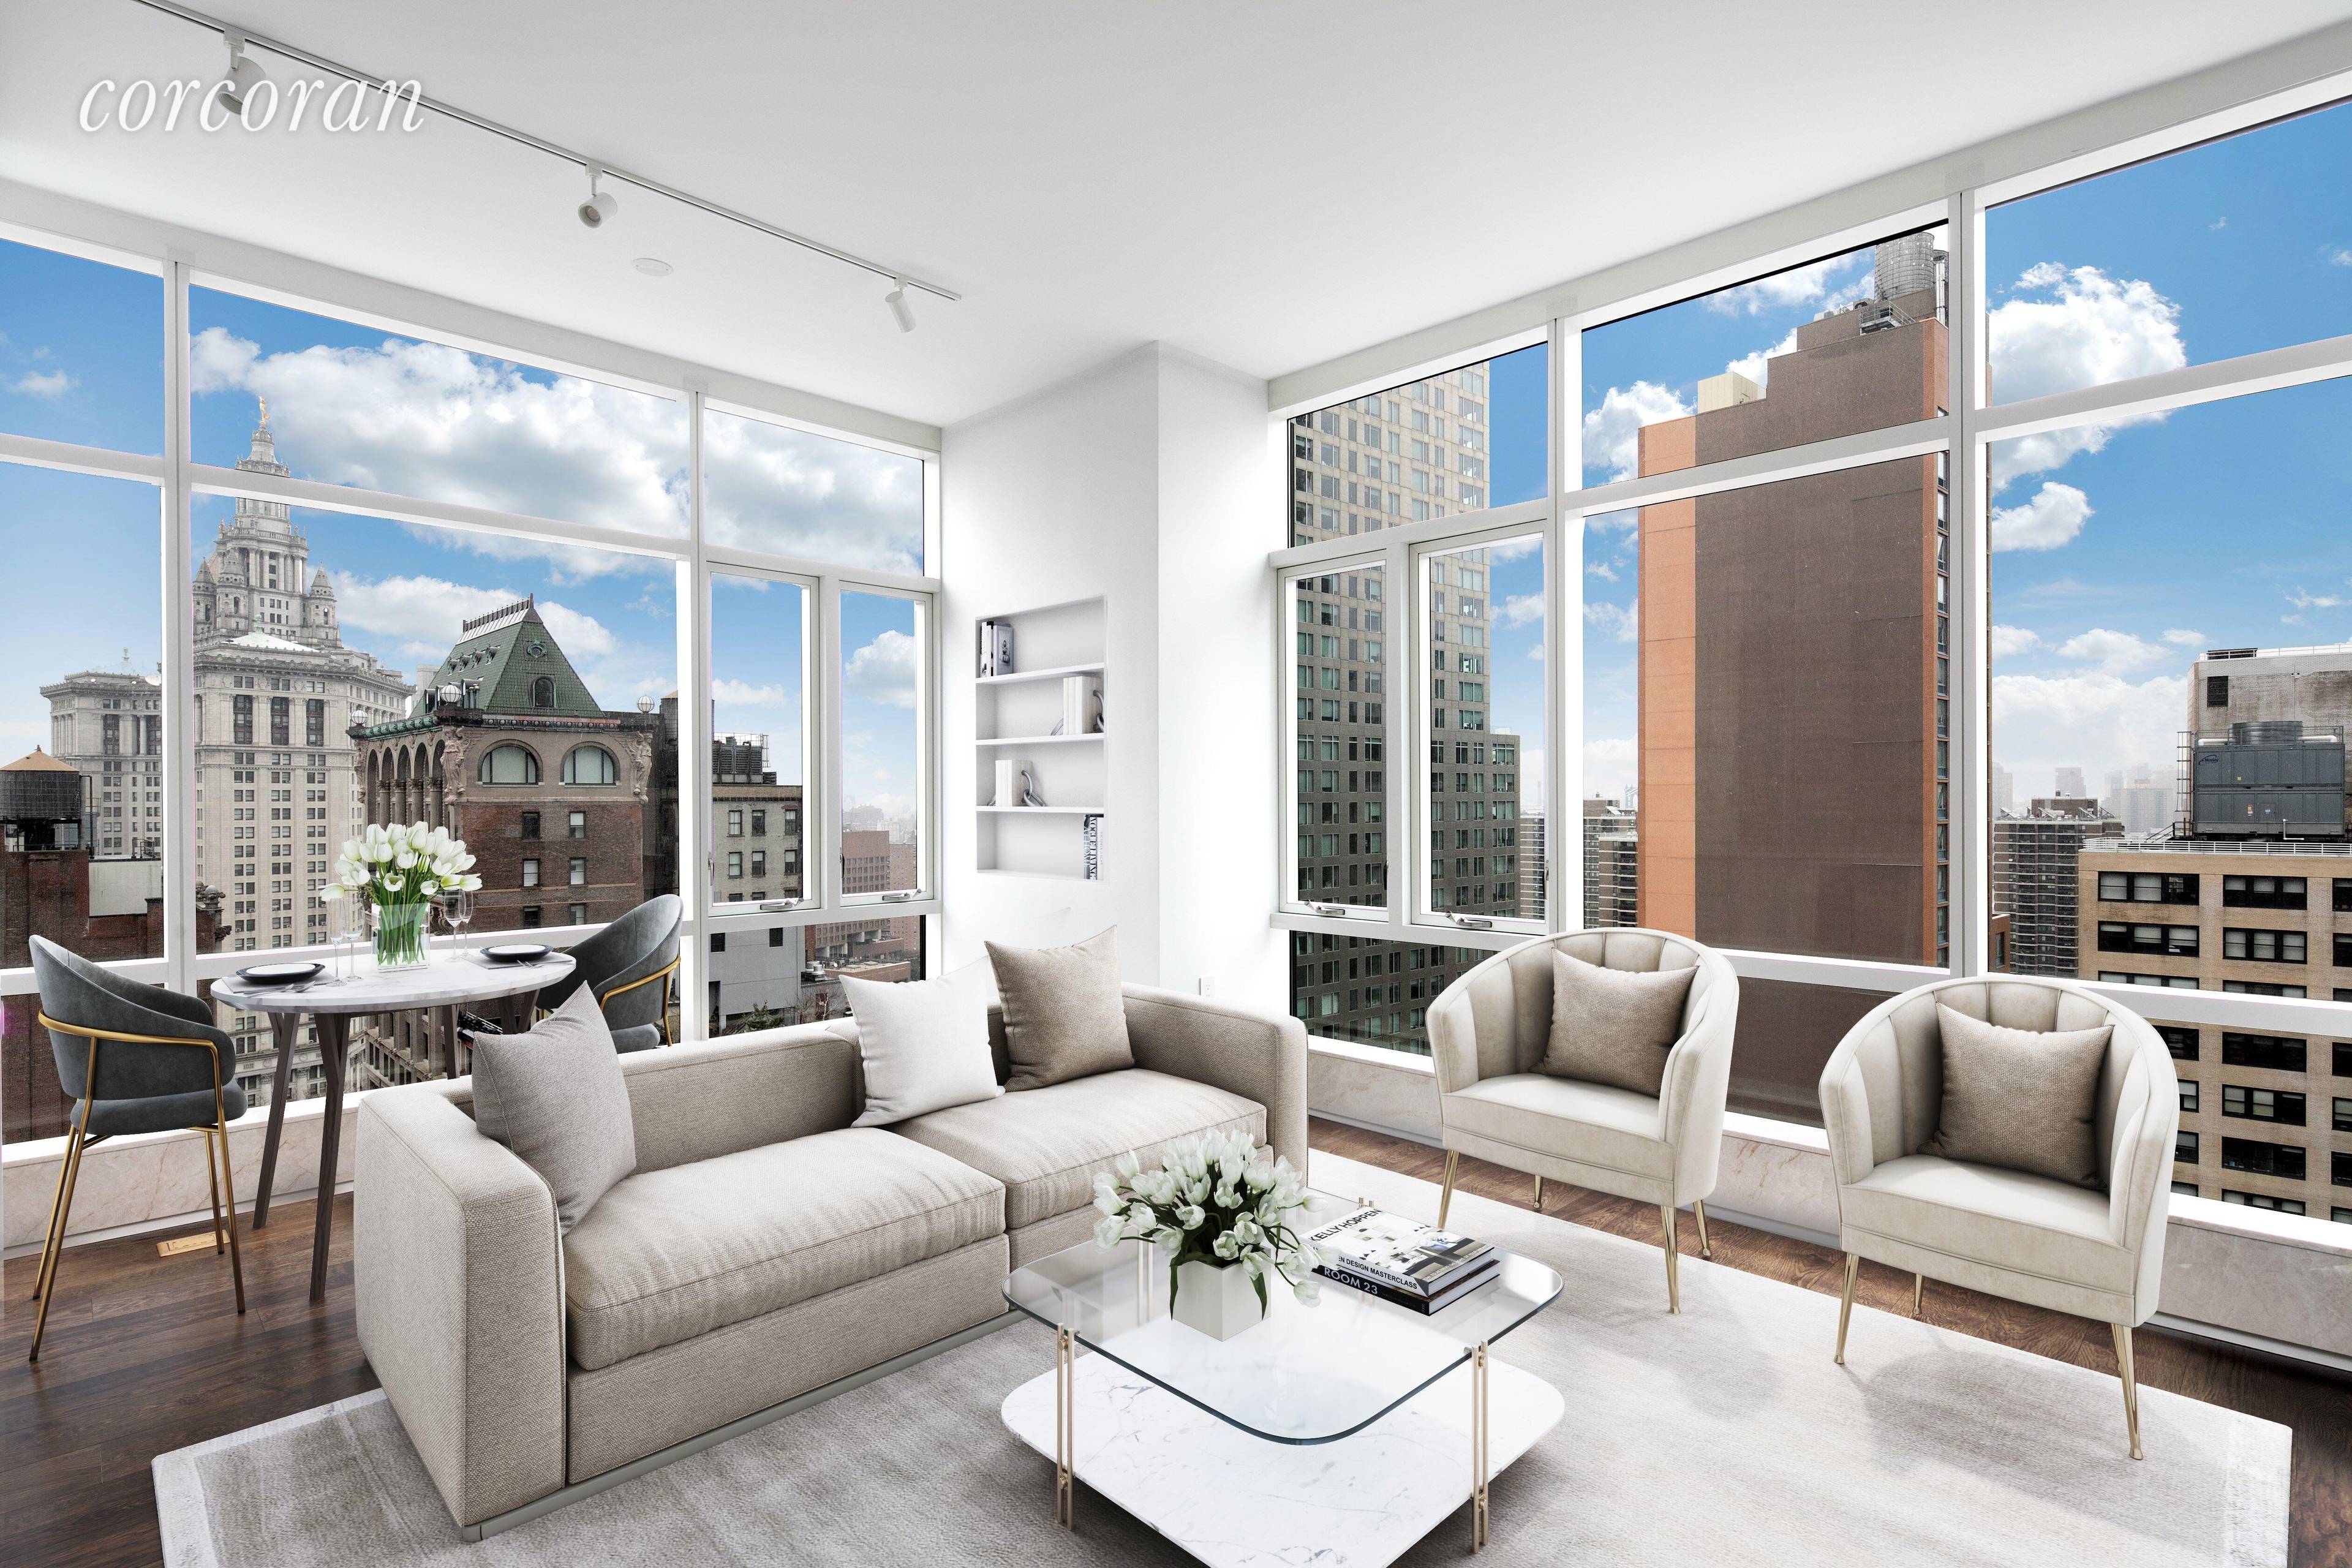 This bright and airy corner 1 bedroom 1 bathroom located in the heart of Lower Manhattan is your private sanctuary in the sky.